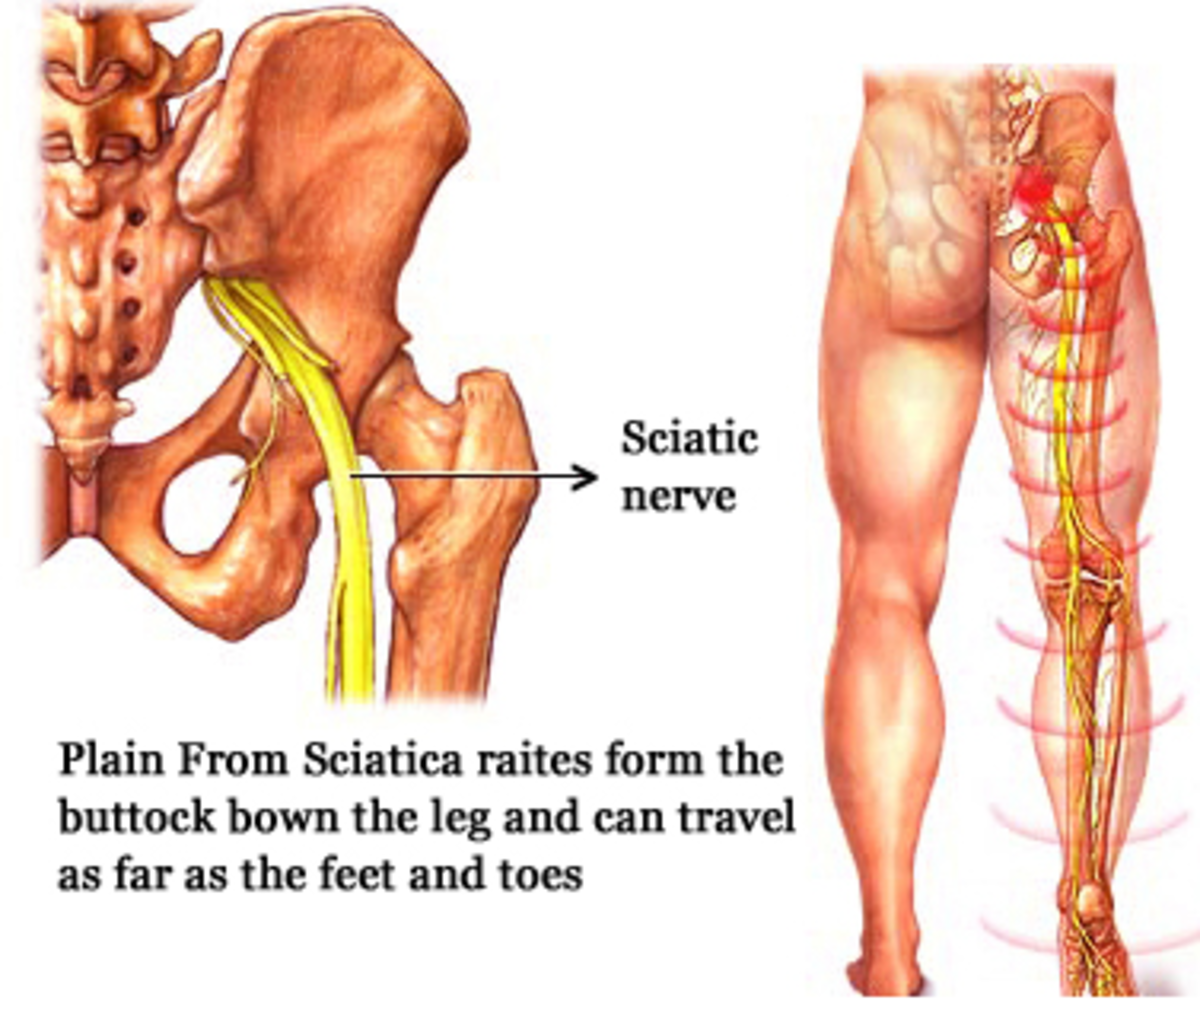 Control Lower Back Pain and Arthritis